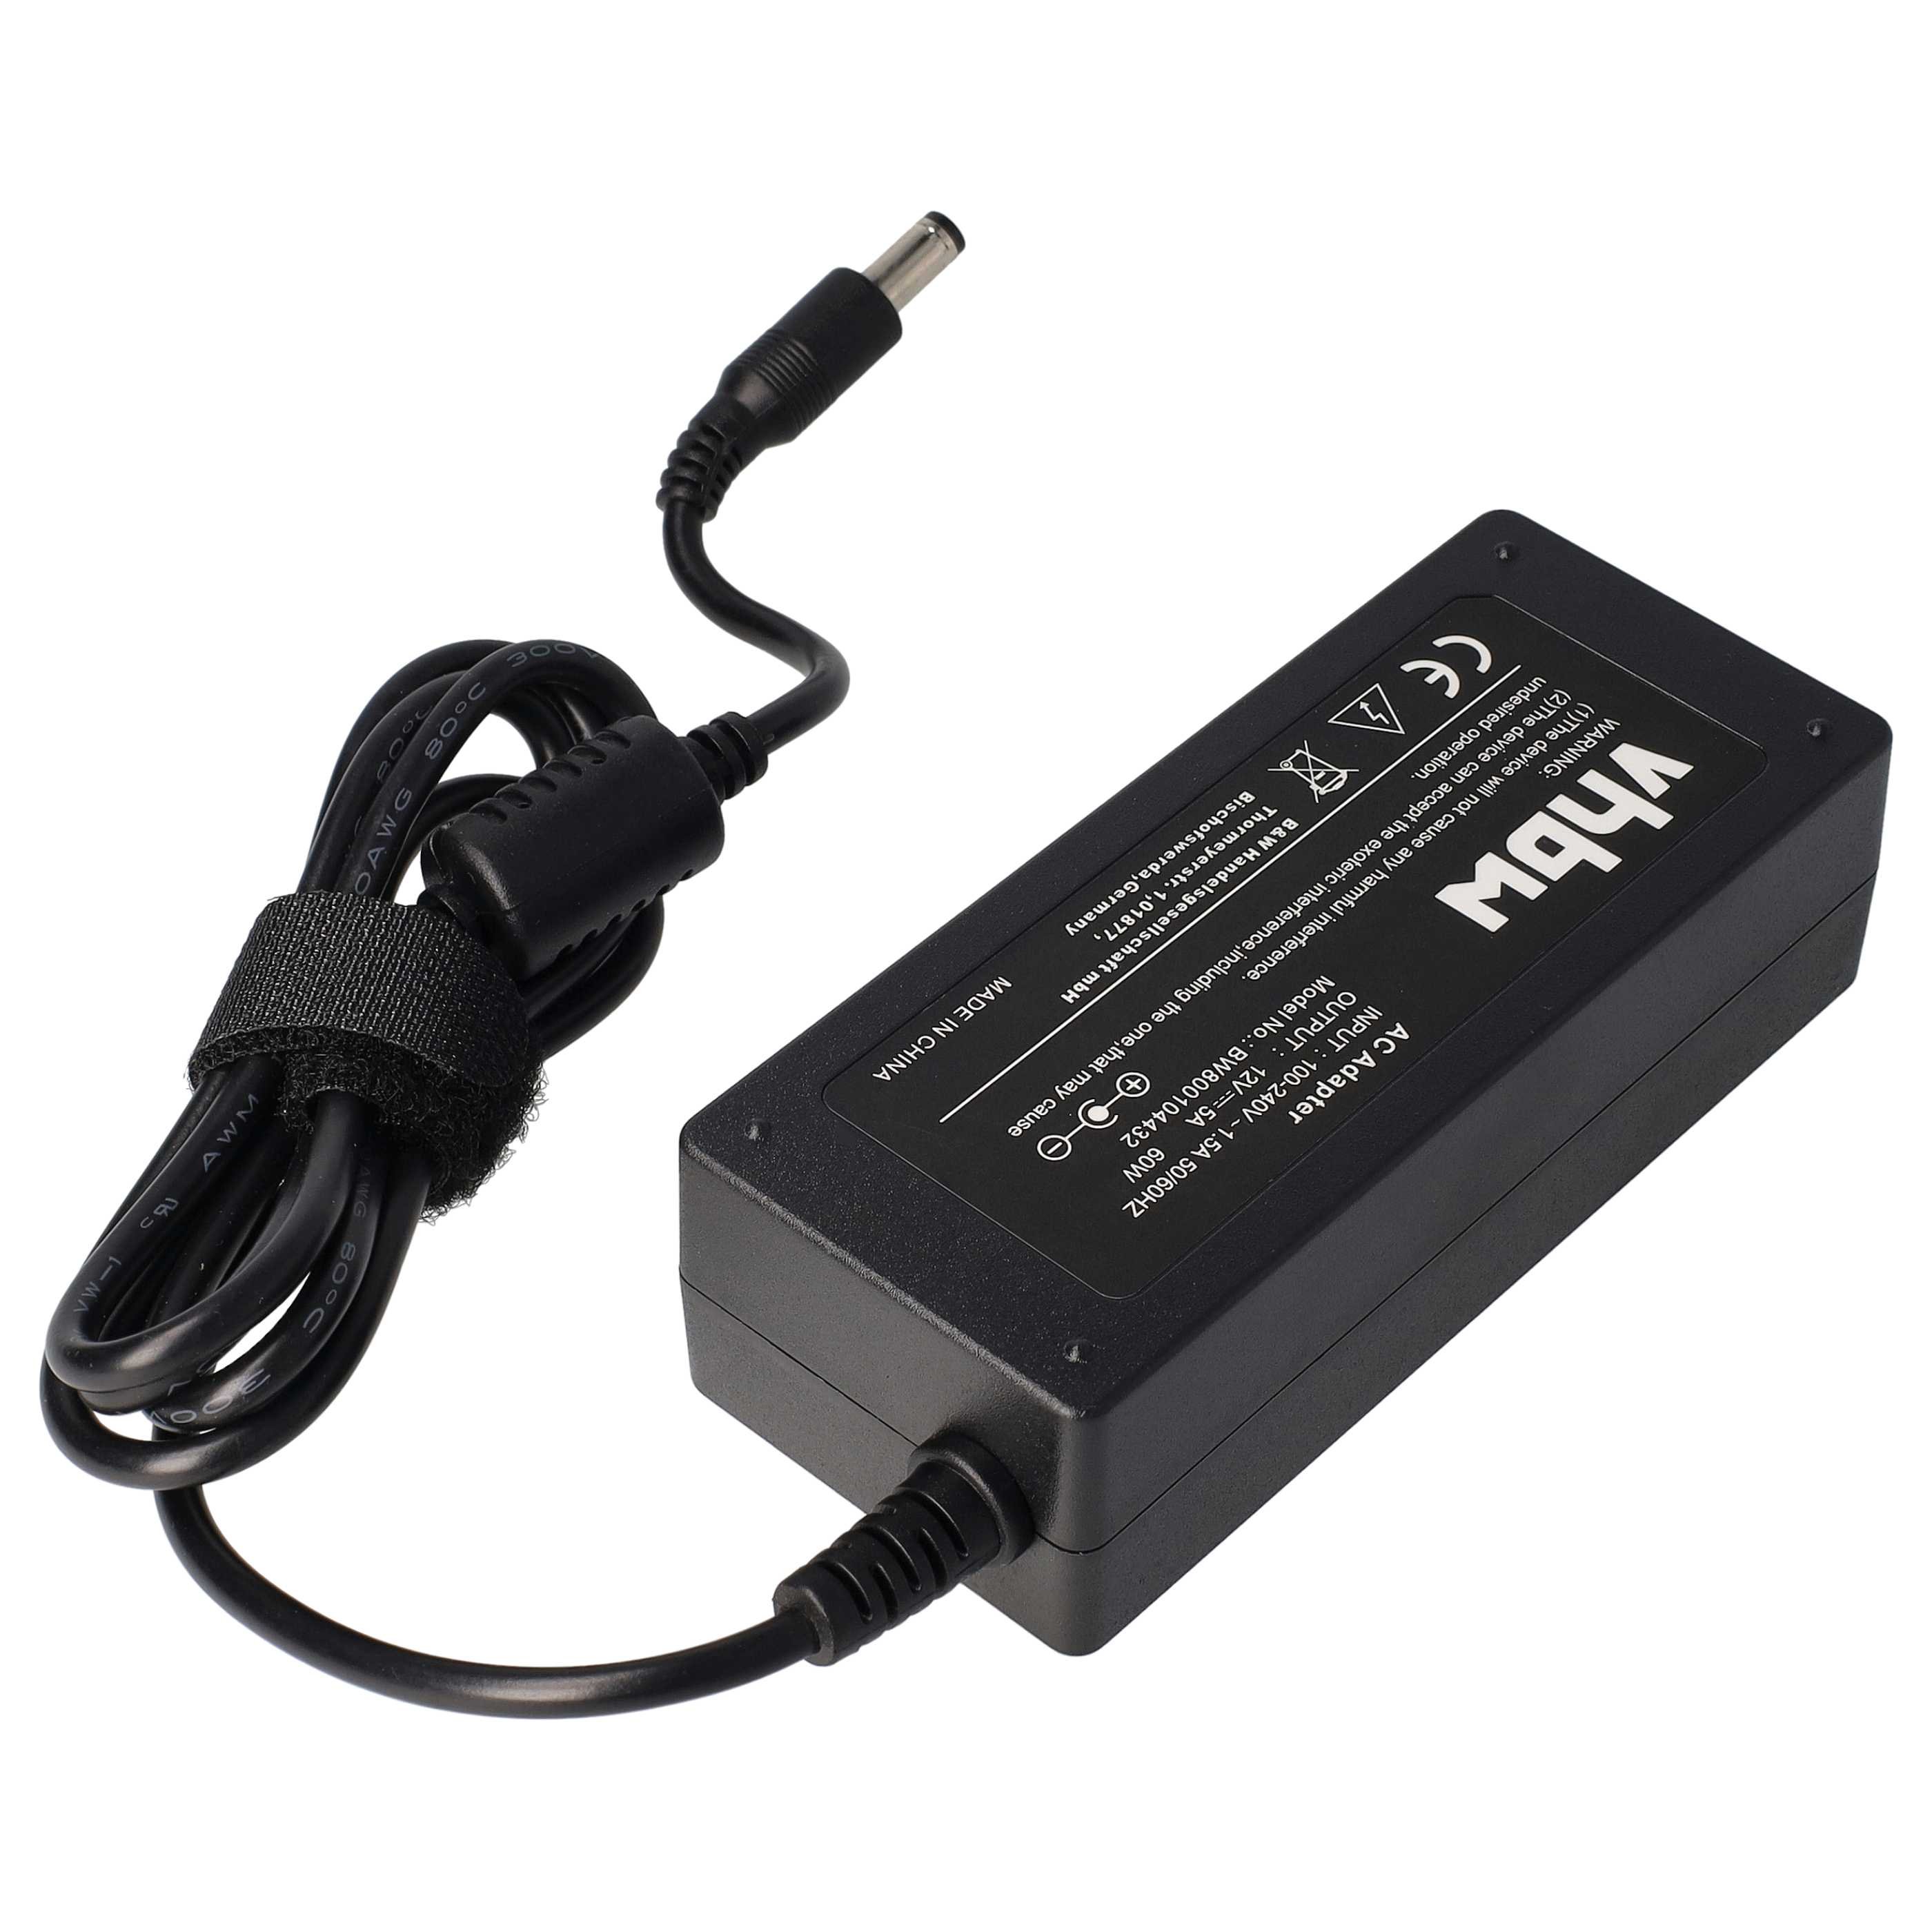 Mains Power Adapter replaces Acer BRA-6012WW for US LogicNotebook etc., 60 W